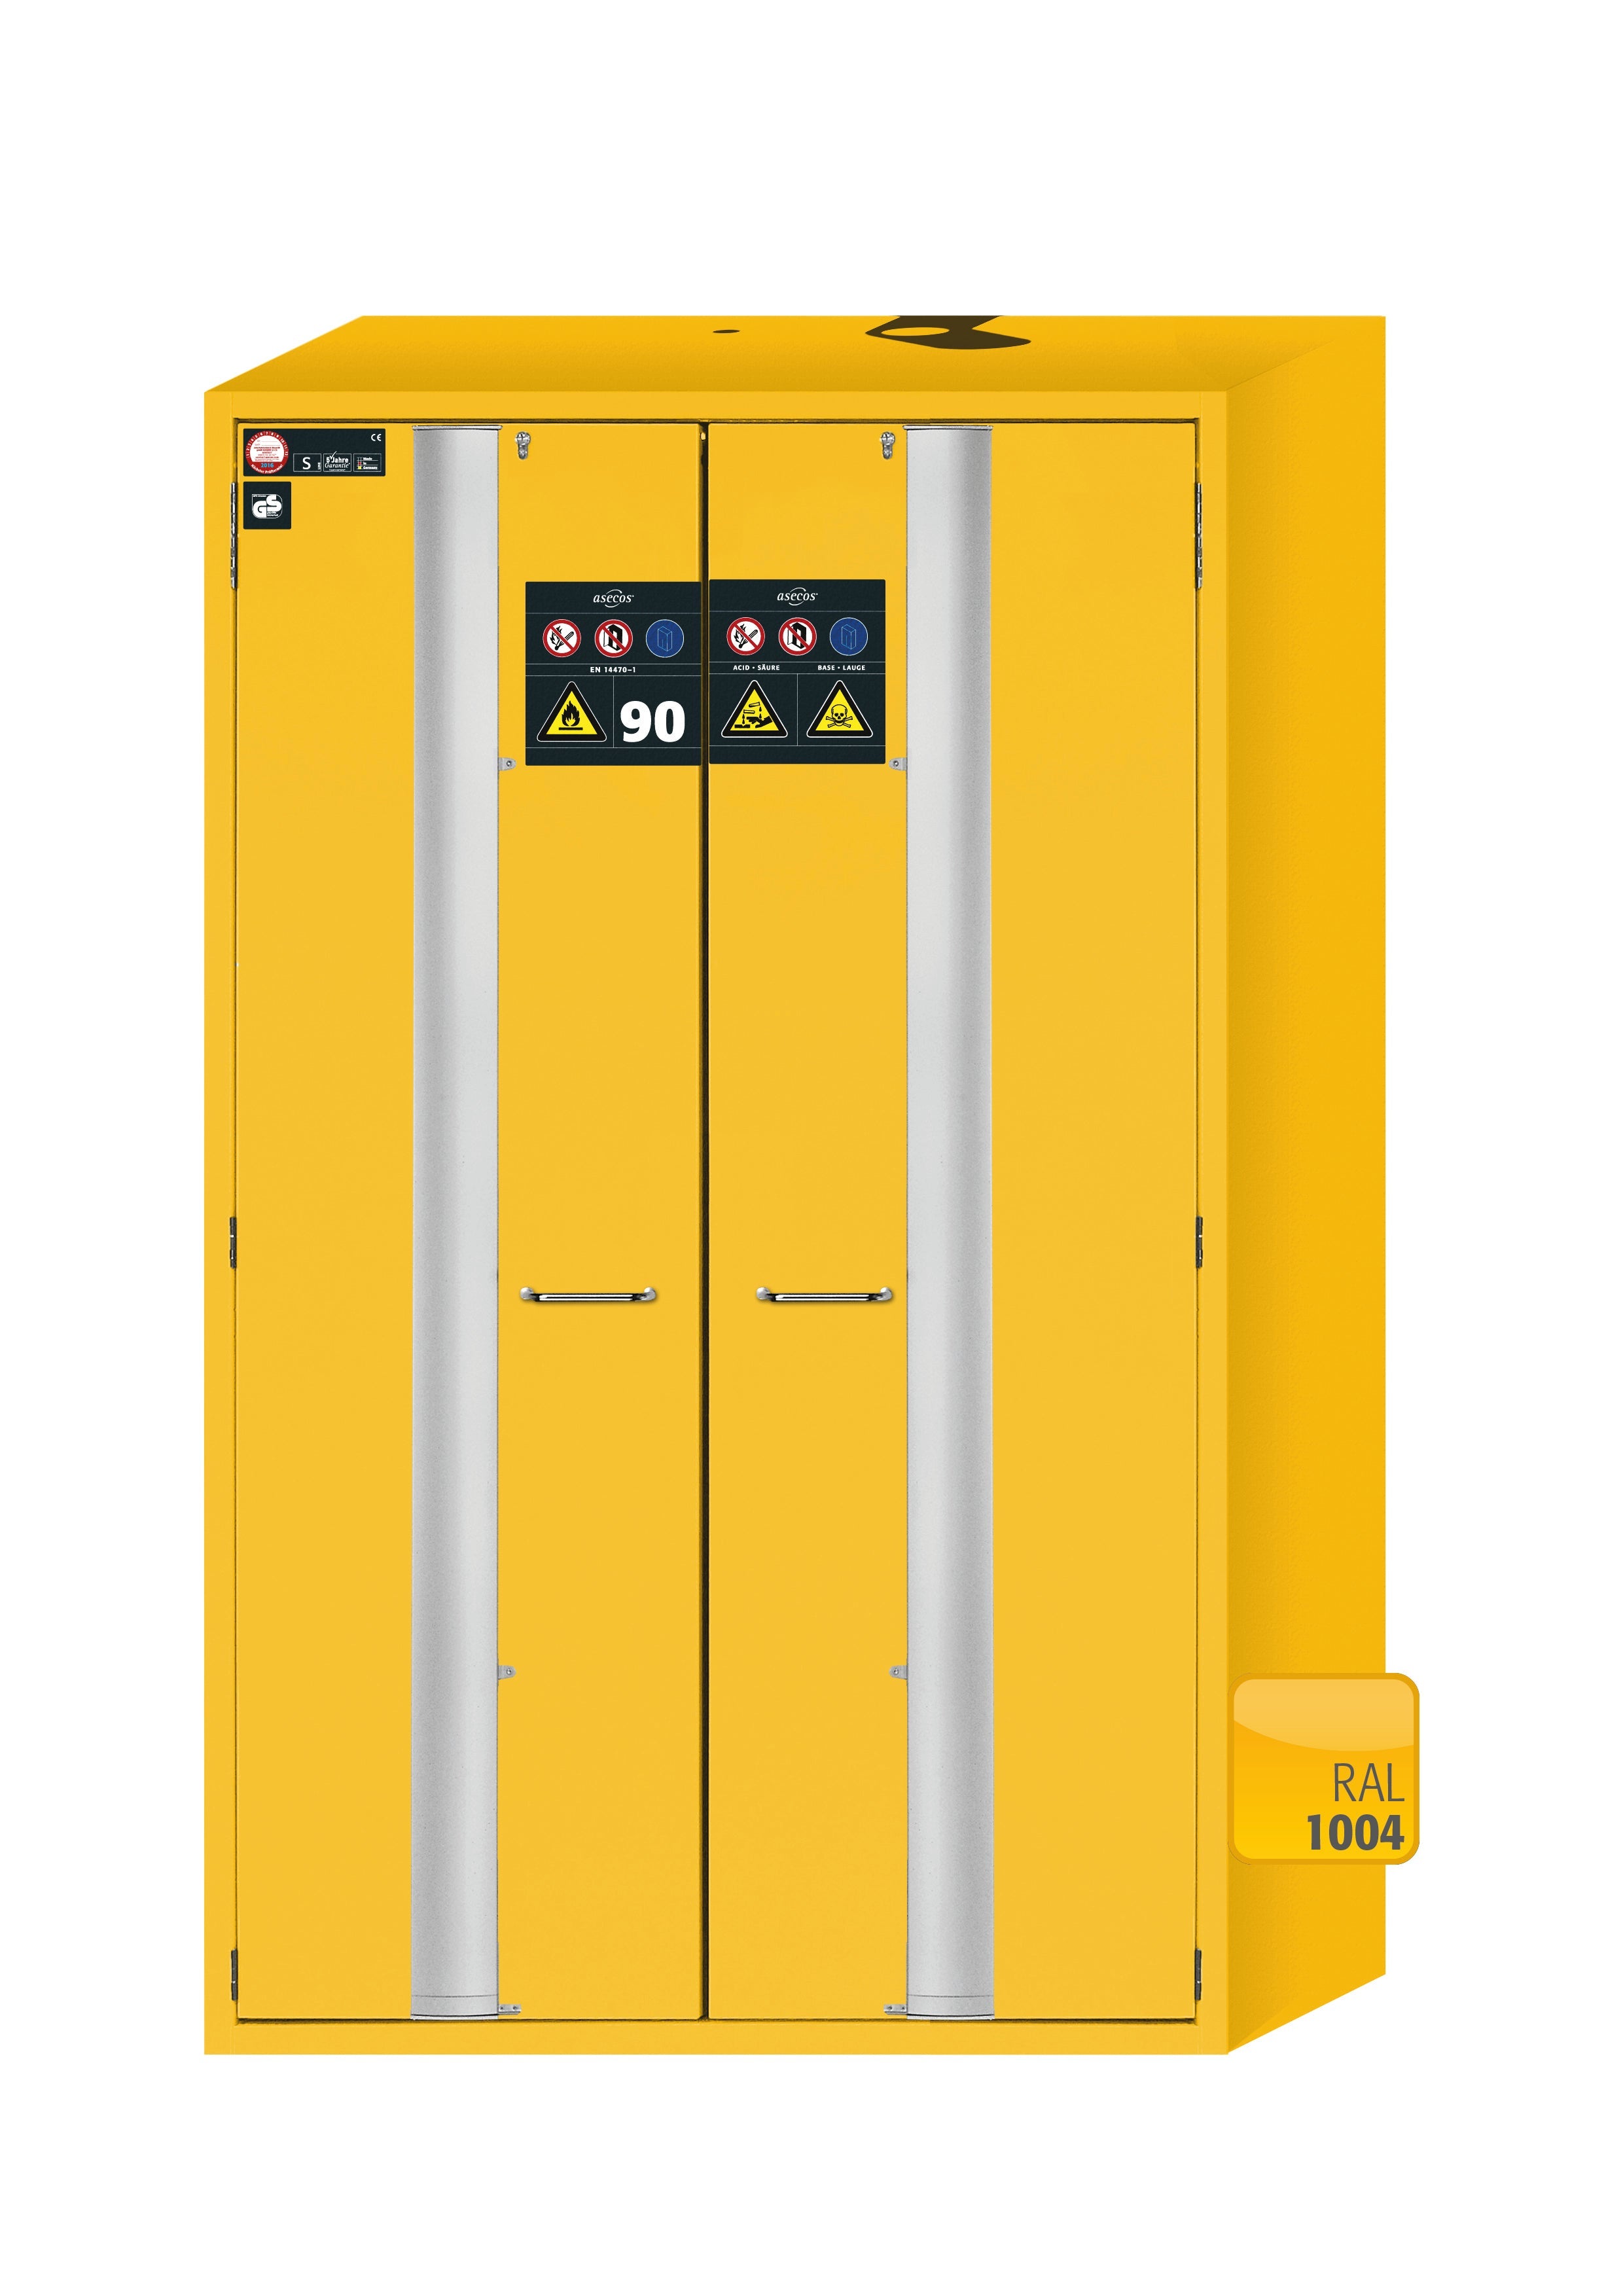 Type 90 safety cabinet S-PHOENIX-90 model S90.196.120.MV.FDAS in safety yellow RAL 1004 with 6x standard shelves (stainless steel 1.4301)